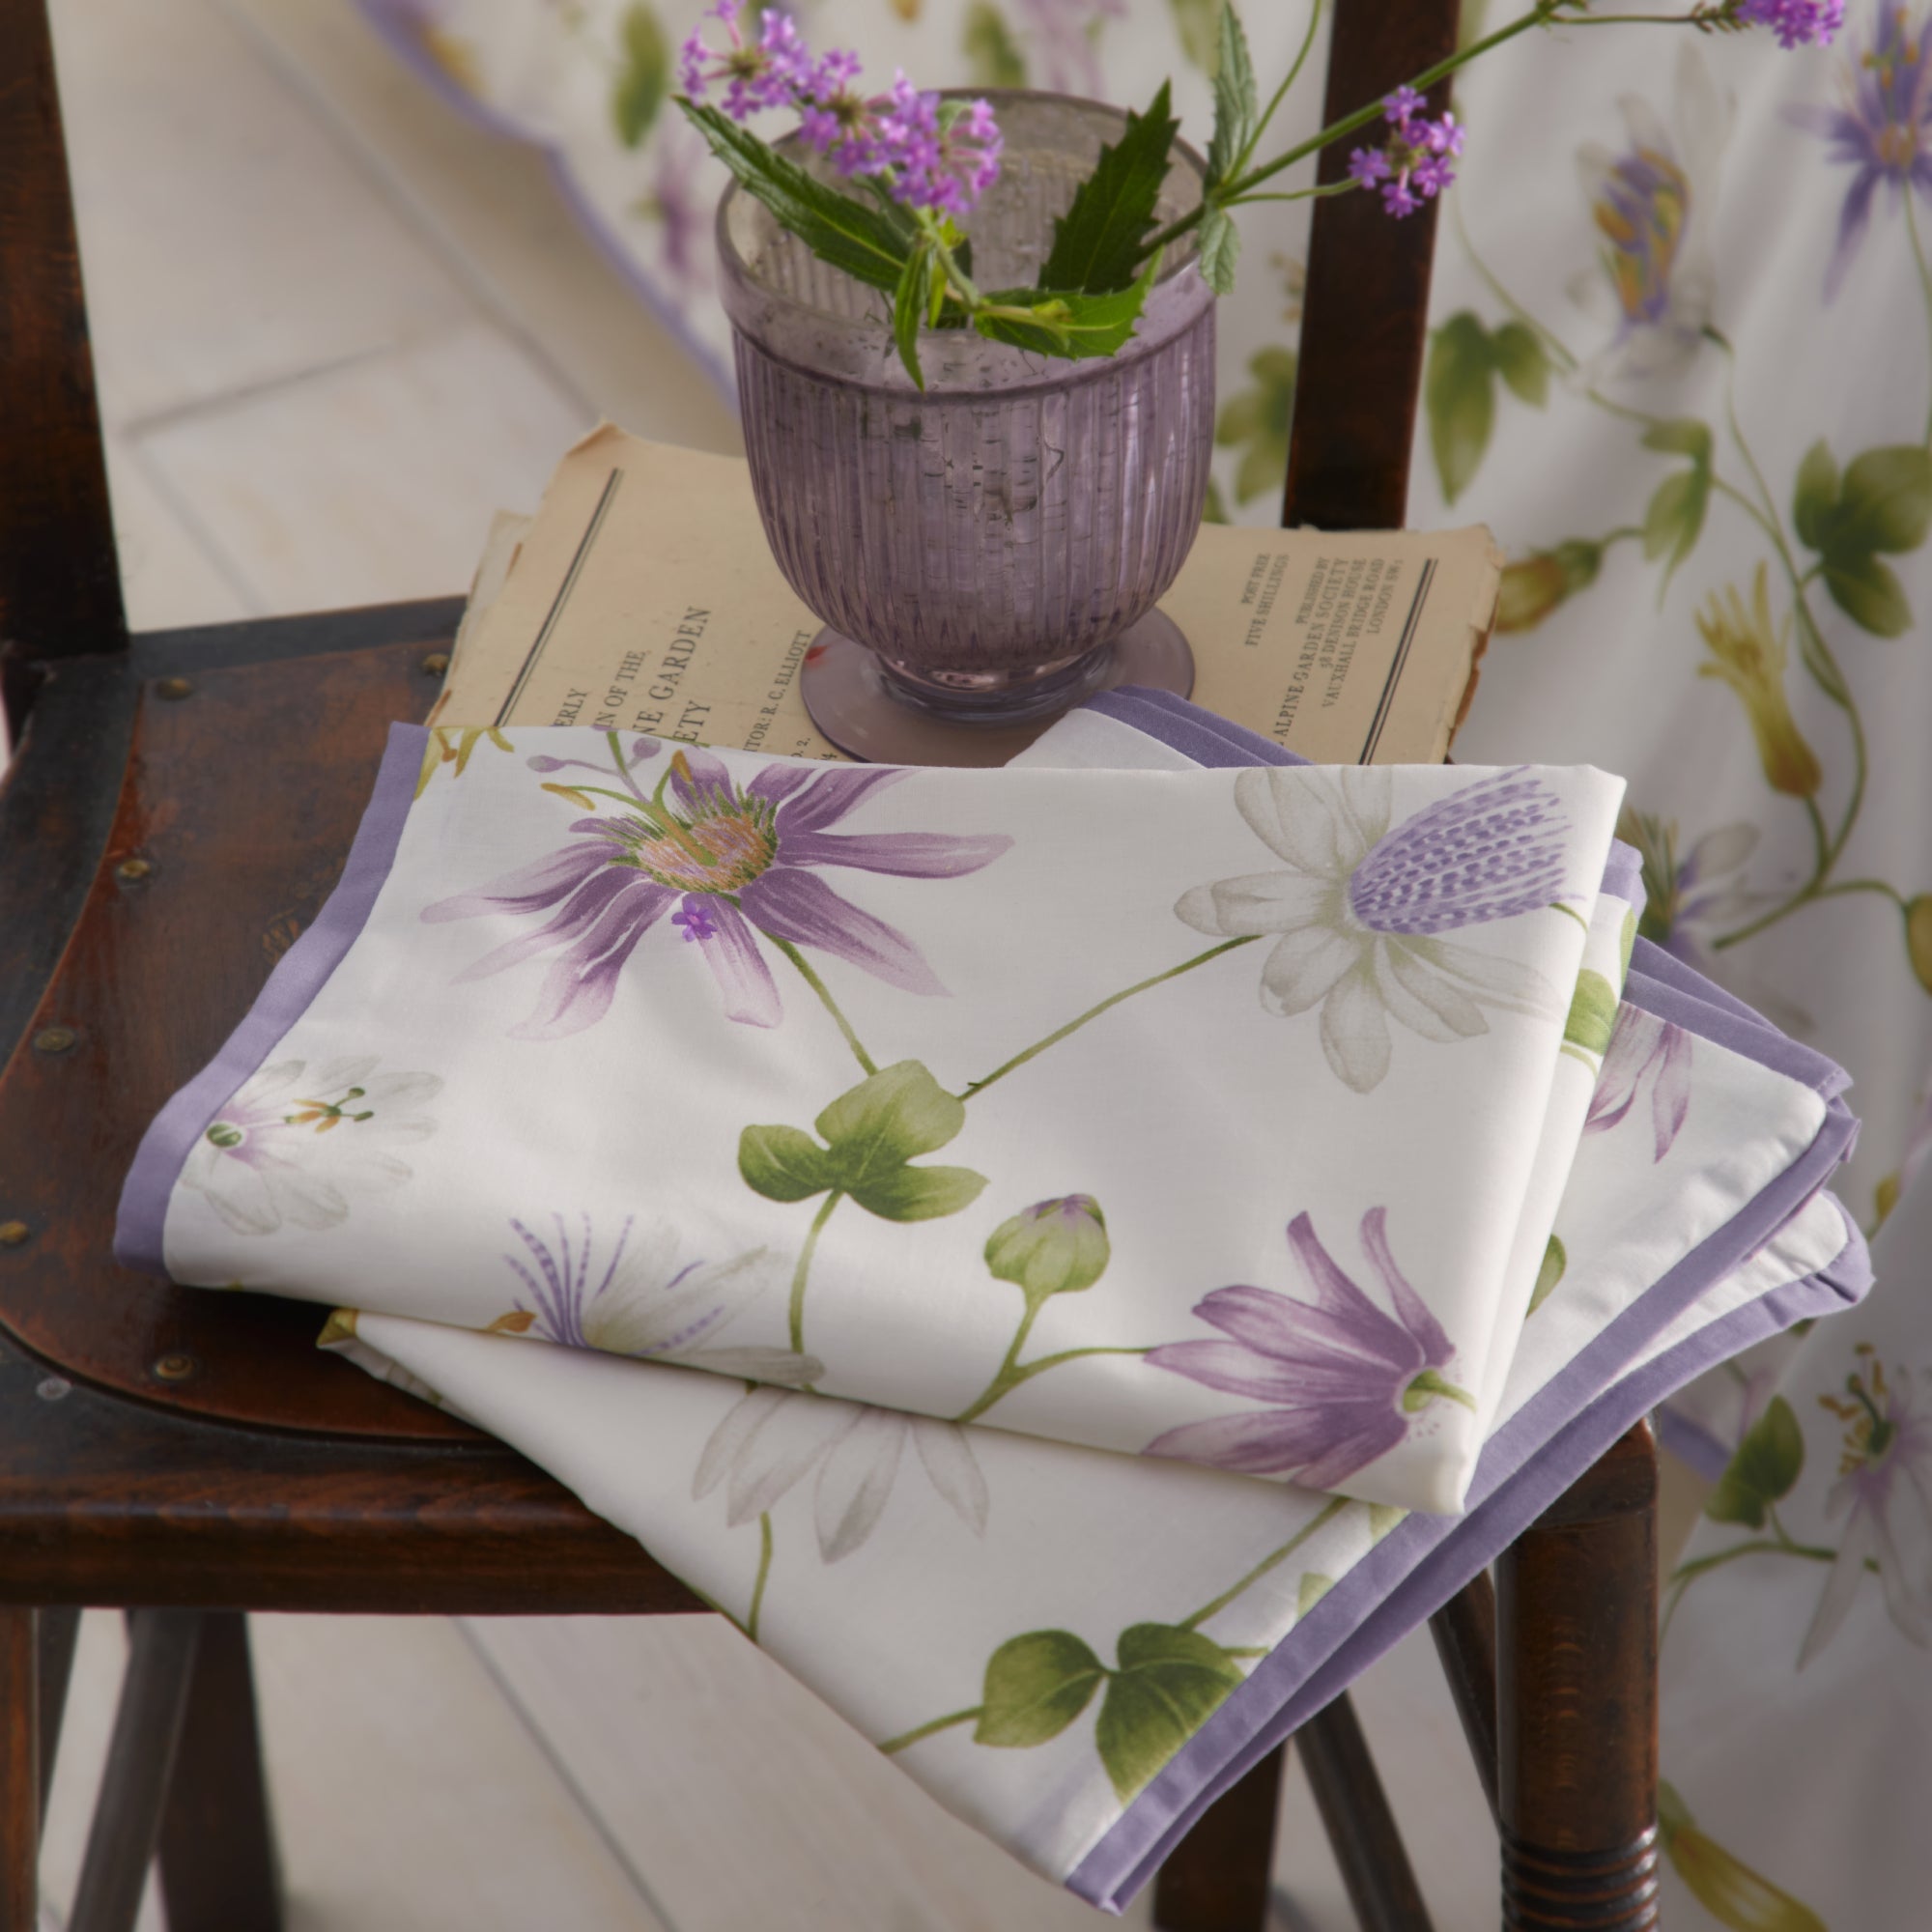 Duvet Cover Set Passion Fruit by Appletree Heritage in Lilac